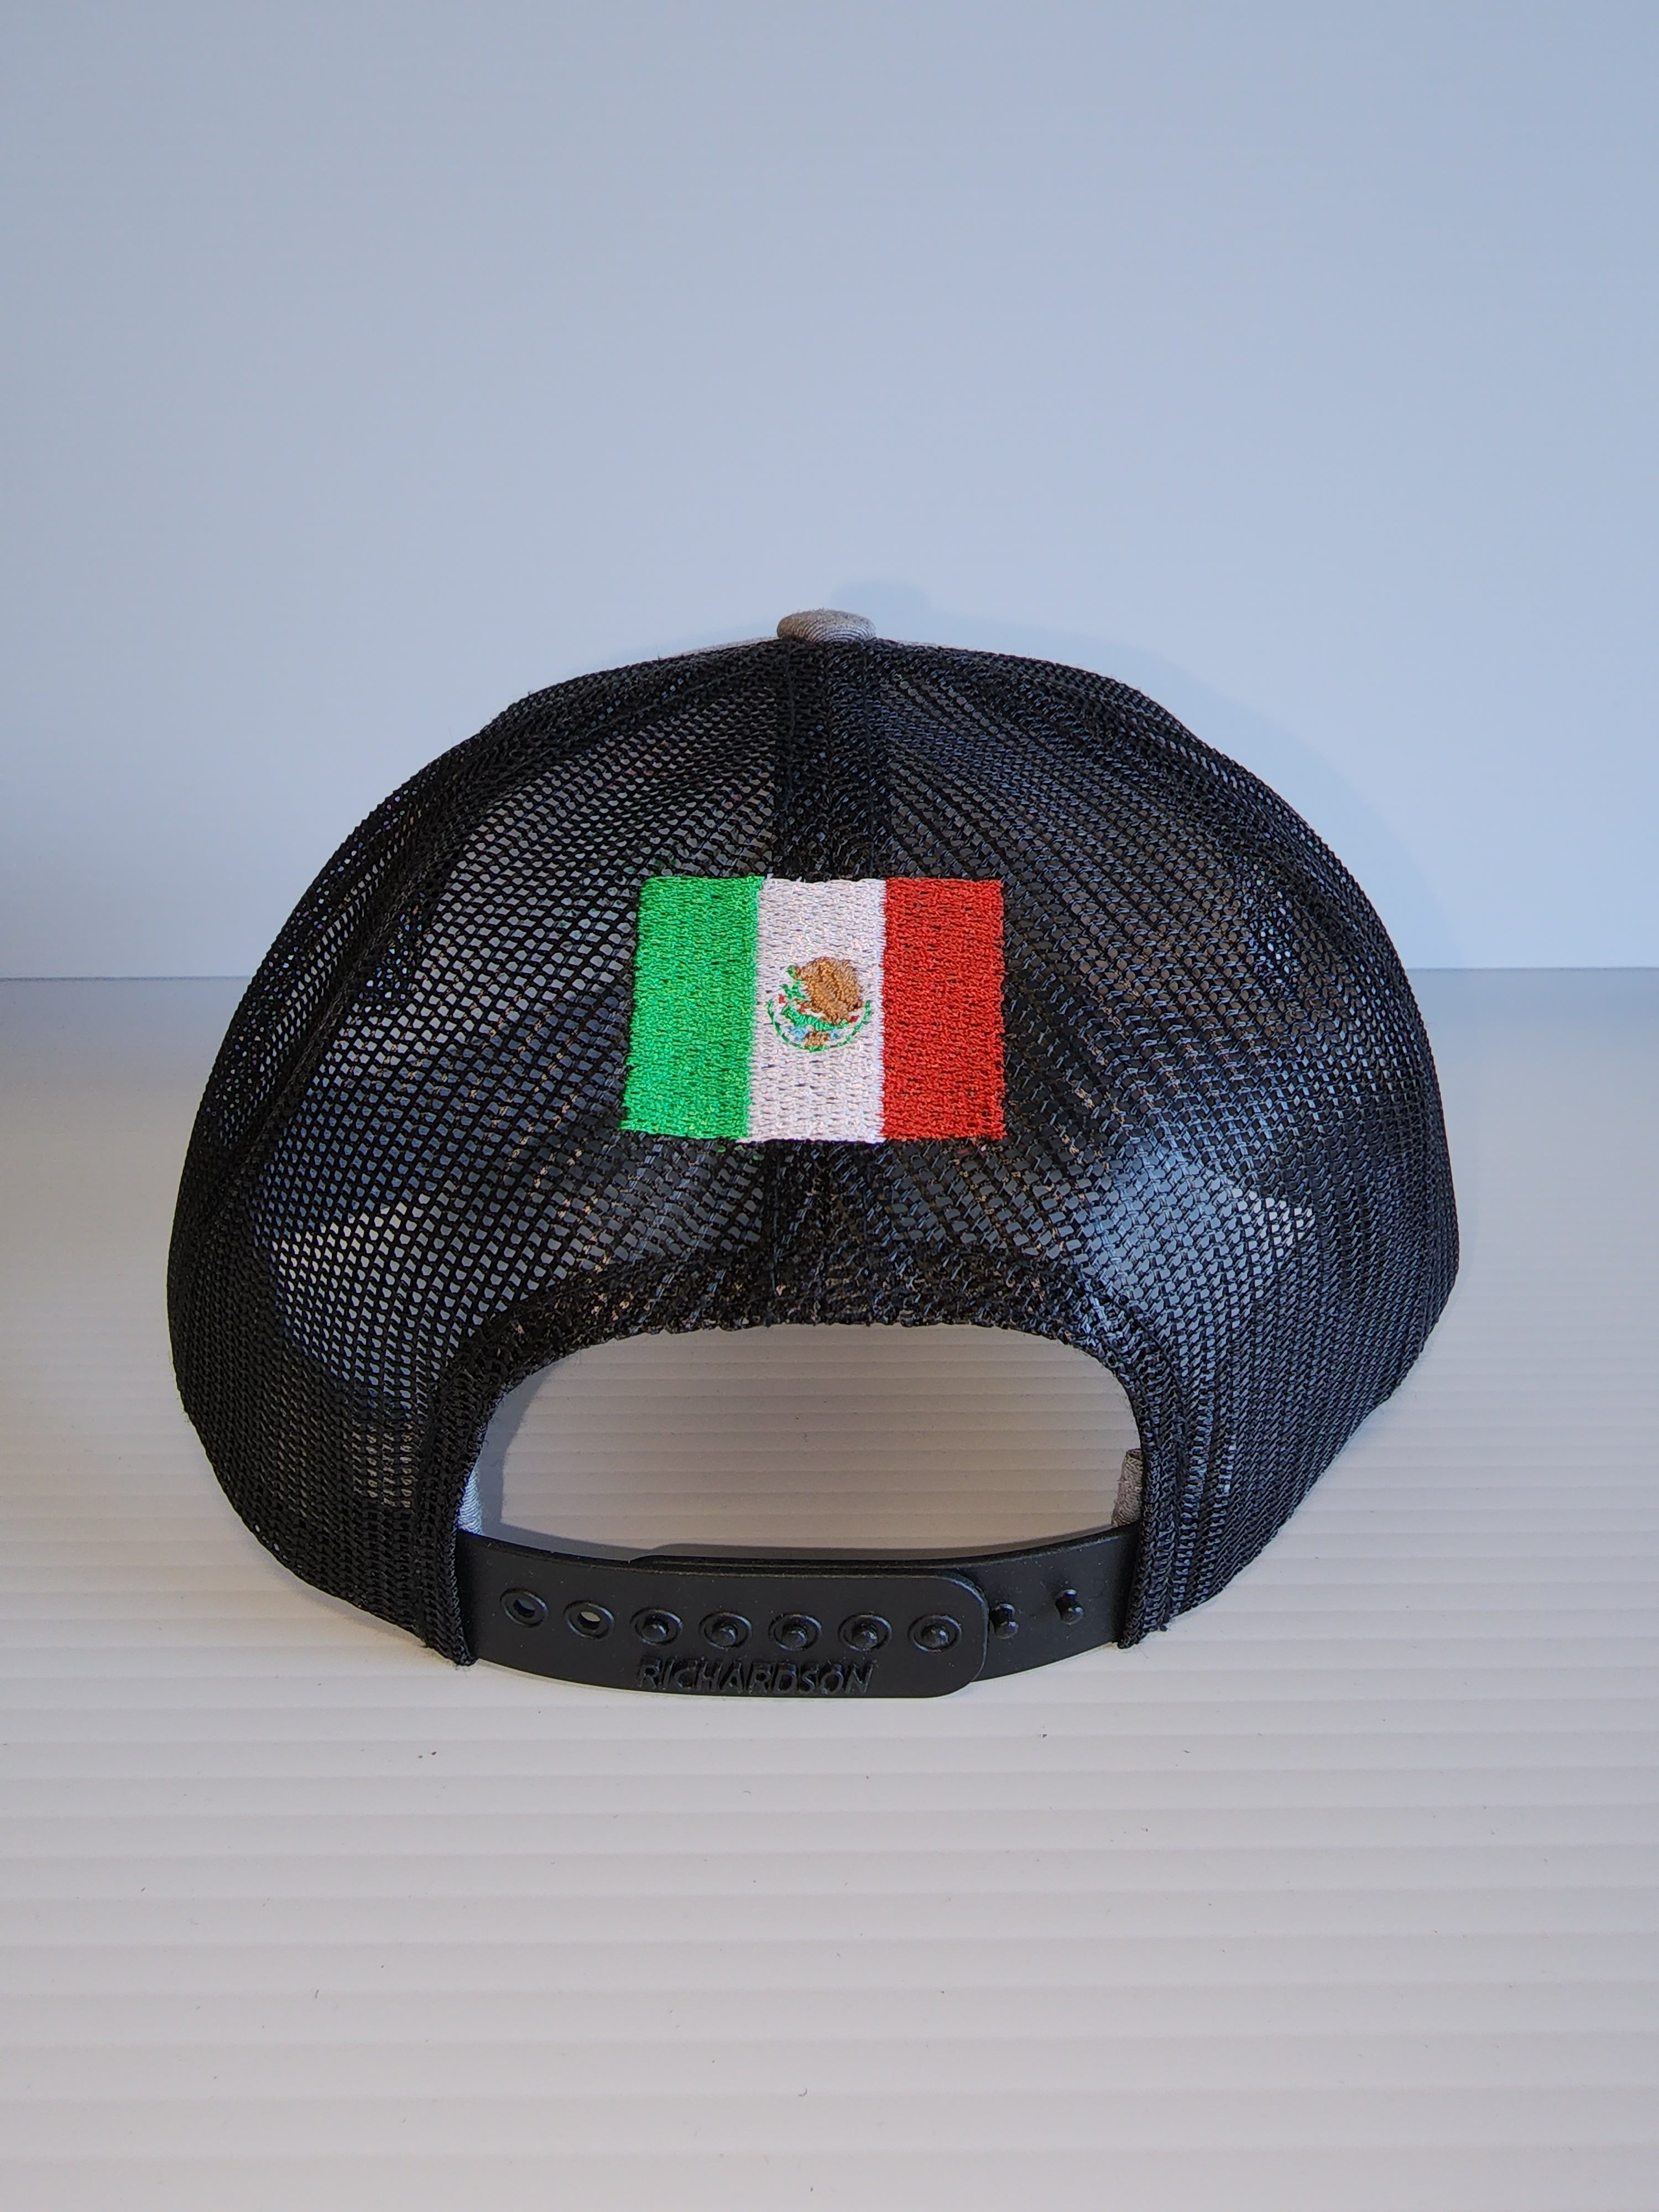 Houston Rockets Mexico Themed Grey/Black Trucker Cap with Mexican Flag on the back